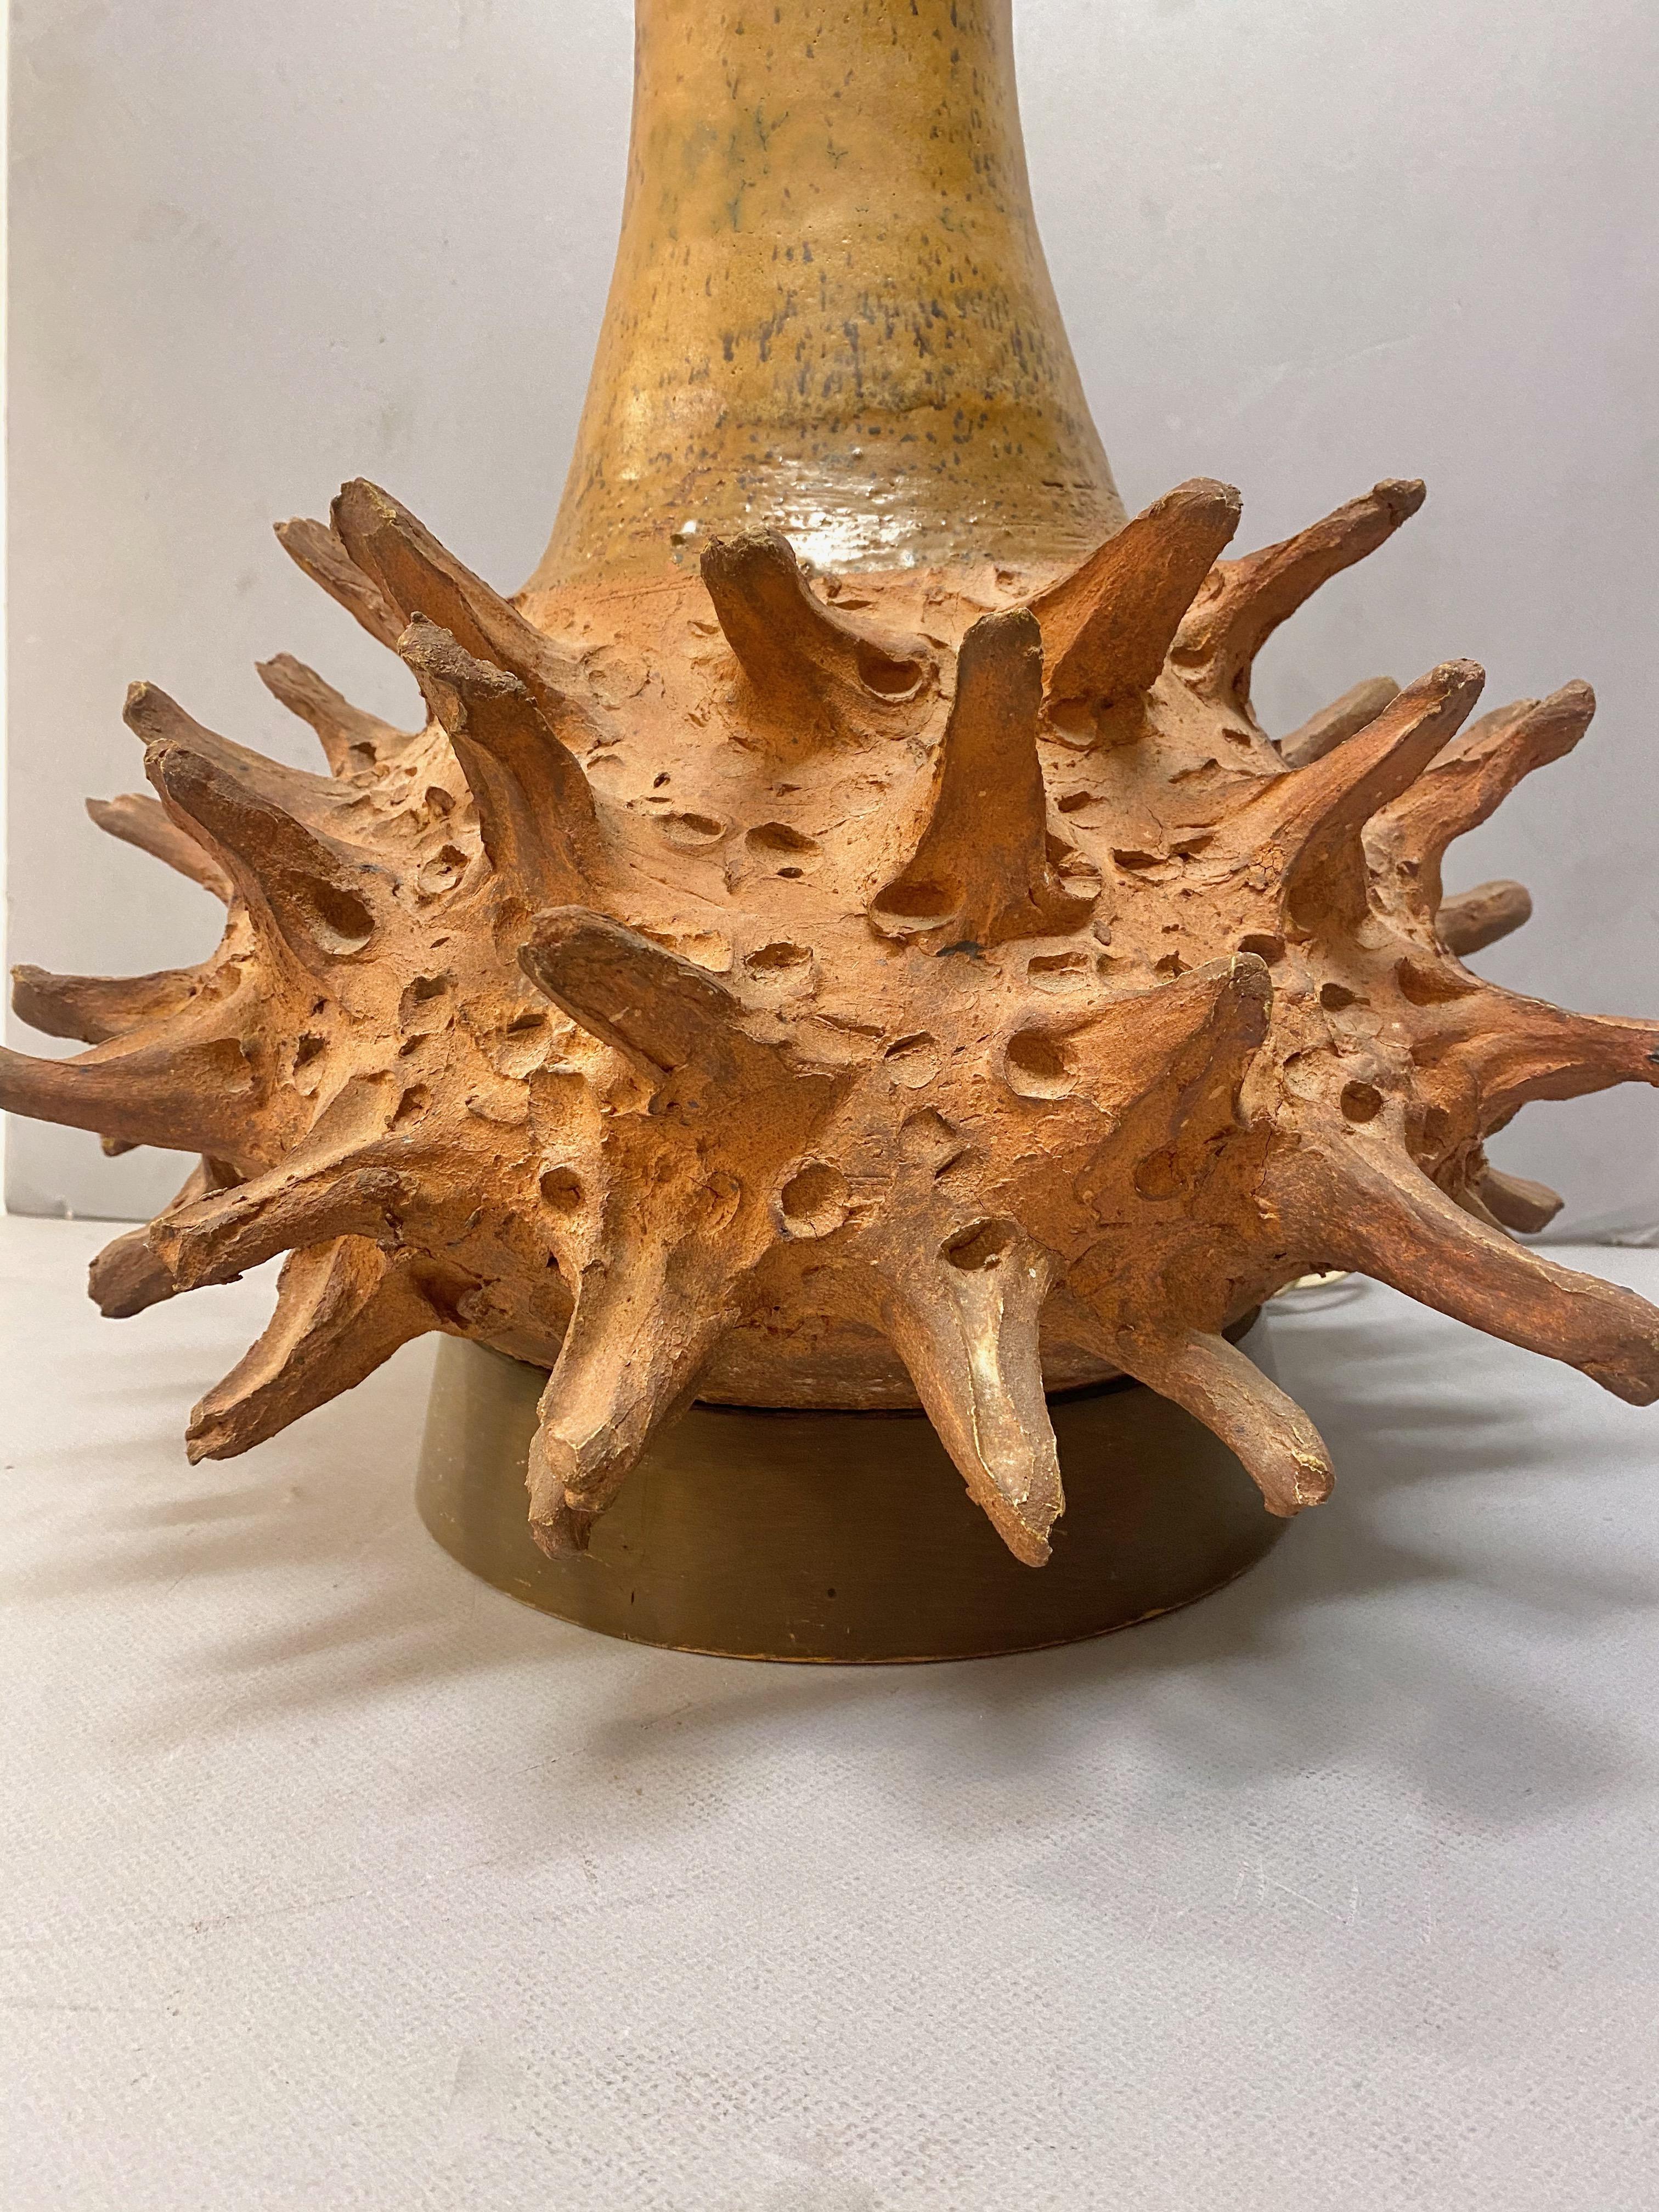 This is a stunning mid-century Brutalist artist-made terra cotta lamp. The long-necked spiked bulbous base is monumental in size and a show-stopper. The lamp measures an impressive 43 inches in height--the addition of an appropriate shade would